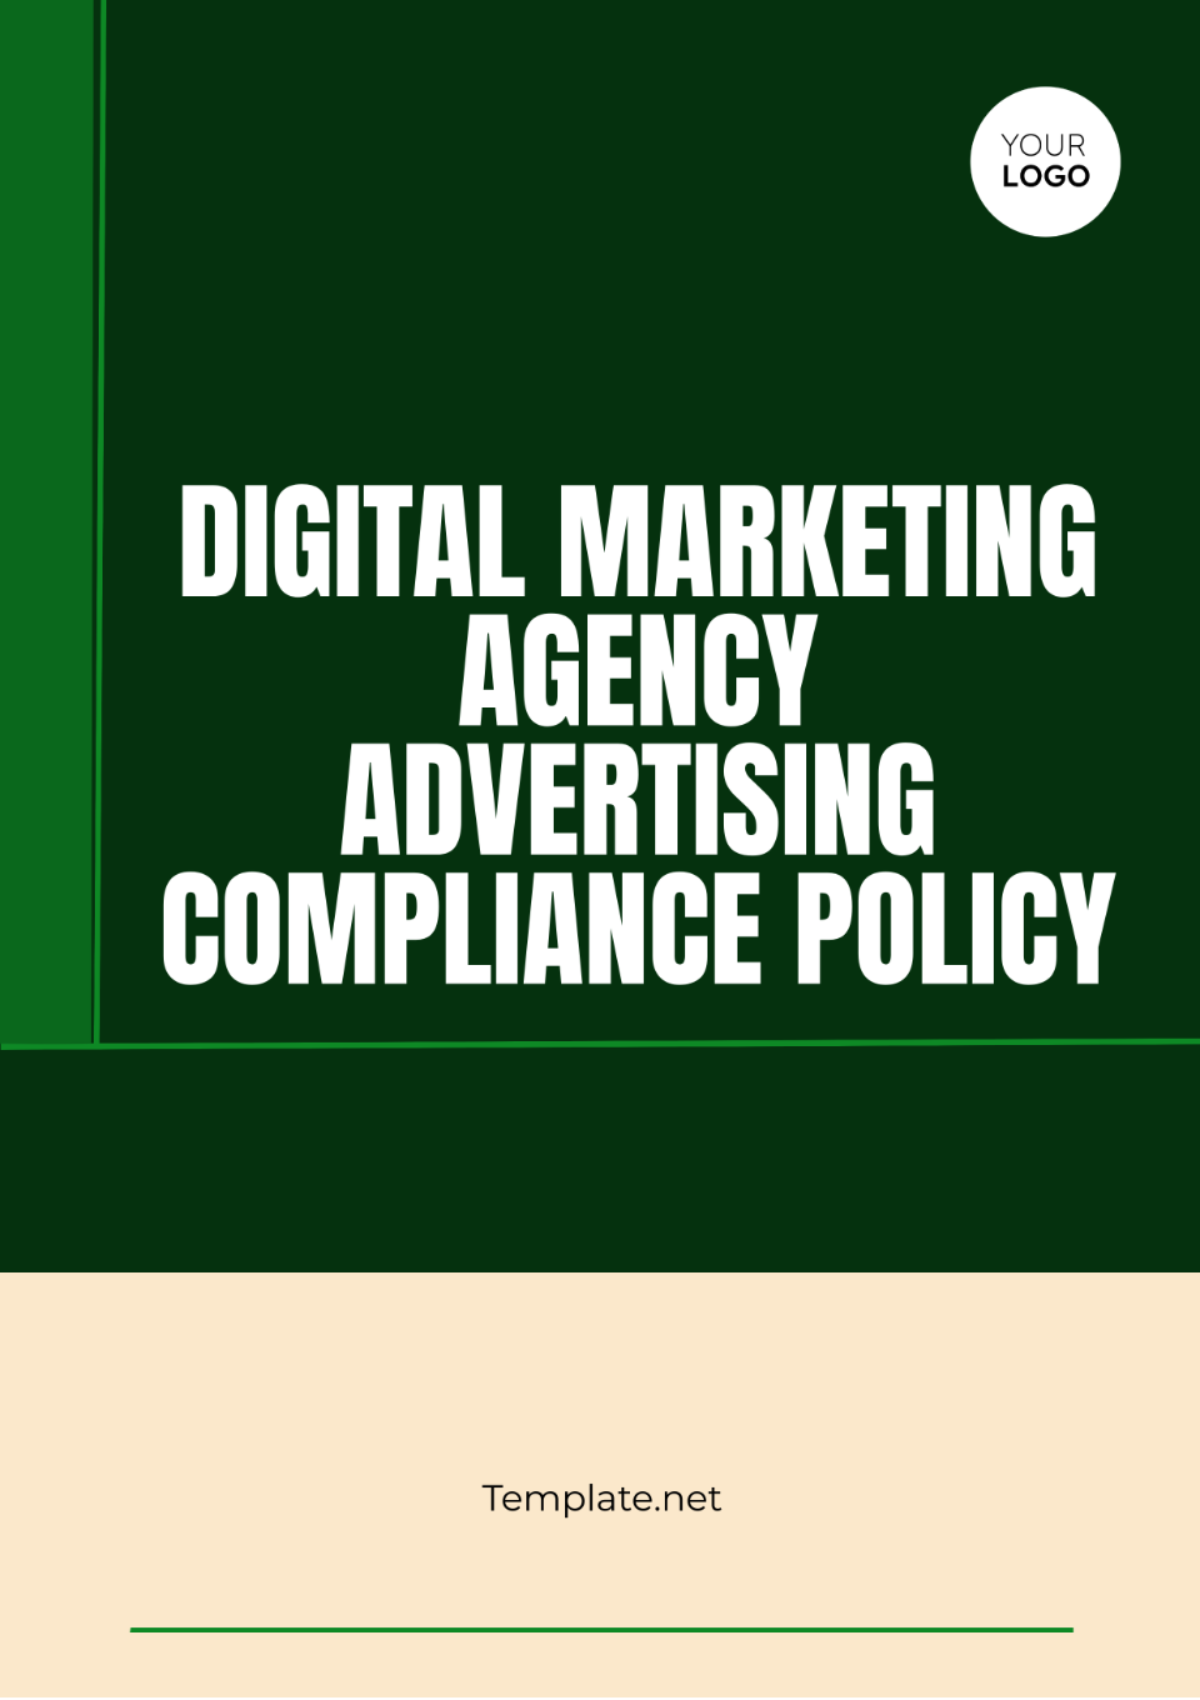 Digital Marketing Agency Advertising Compliance Policy Template